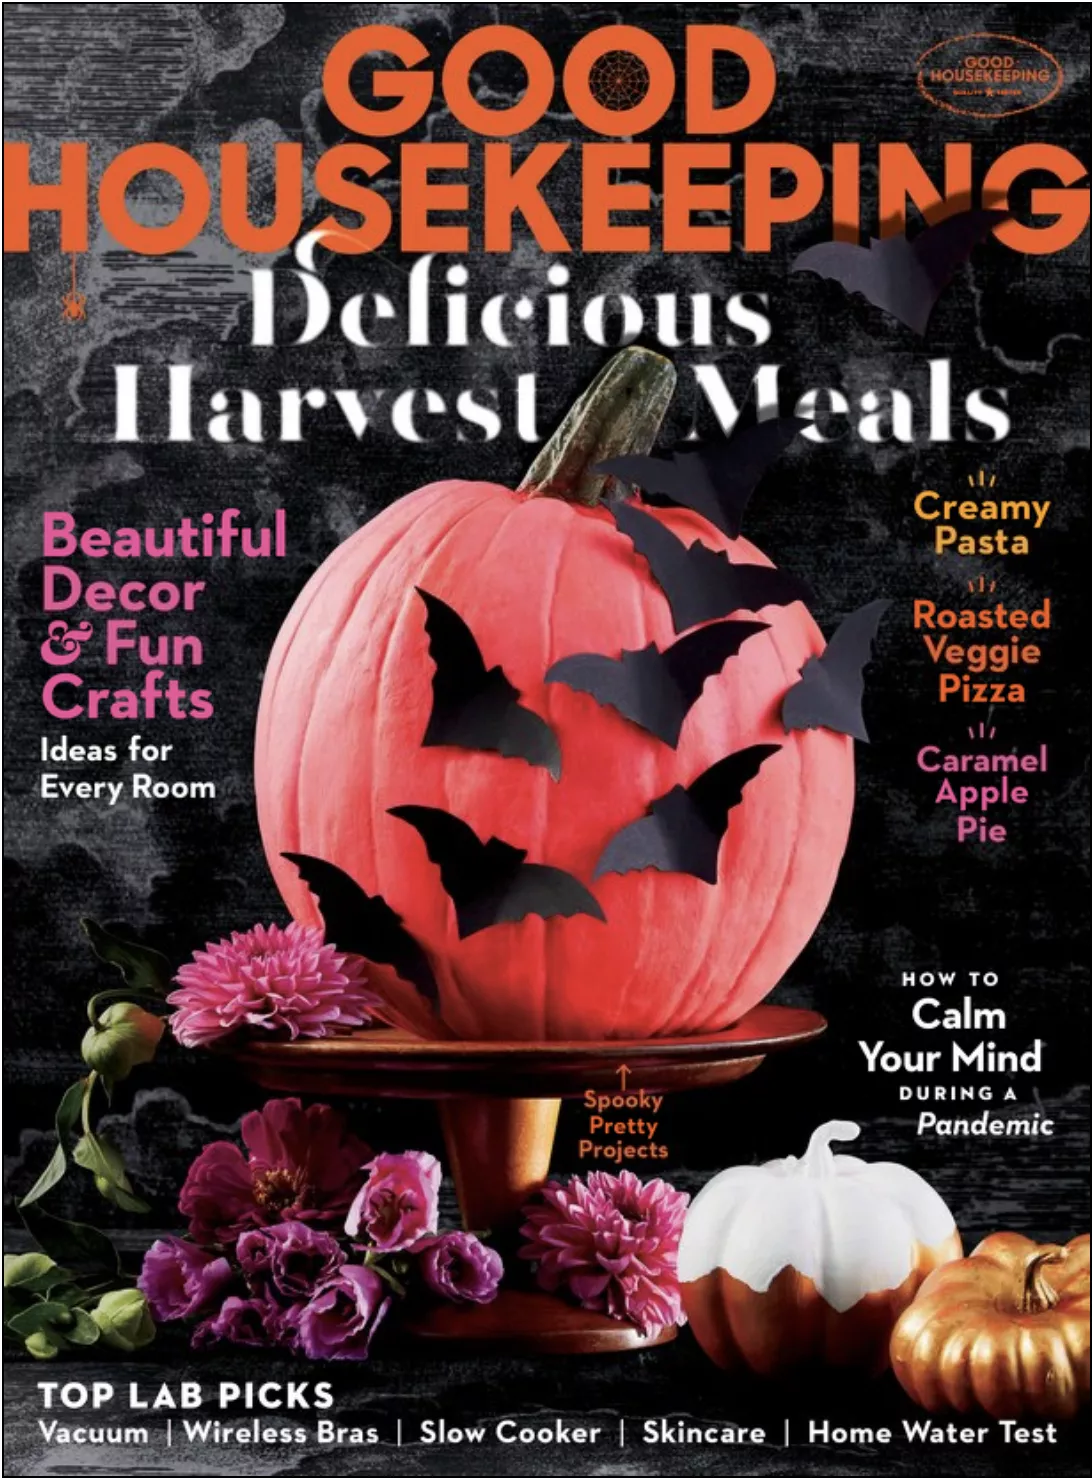 Cover of Good Housekeeping October 2020 with a Jack-o-Lantern